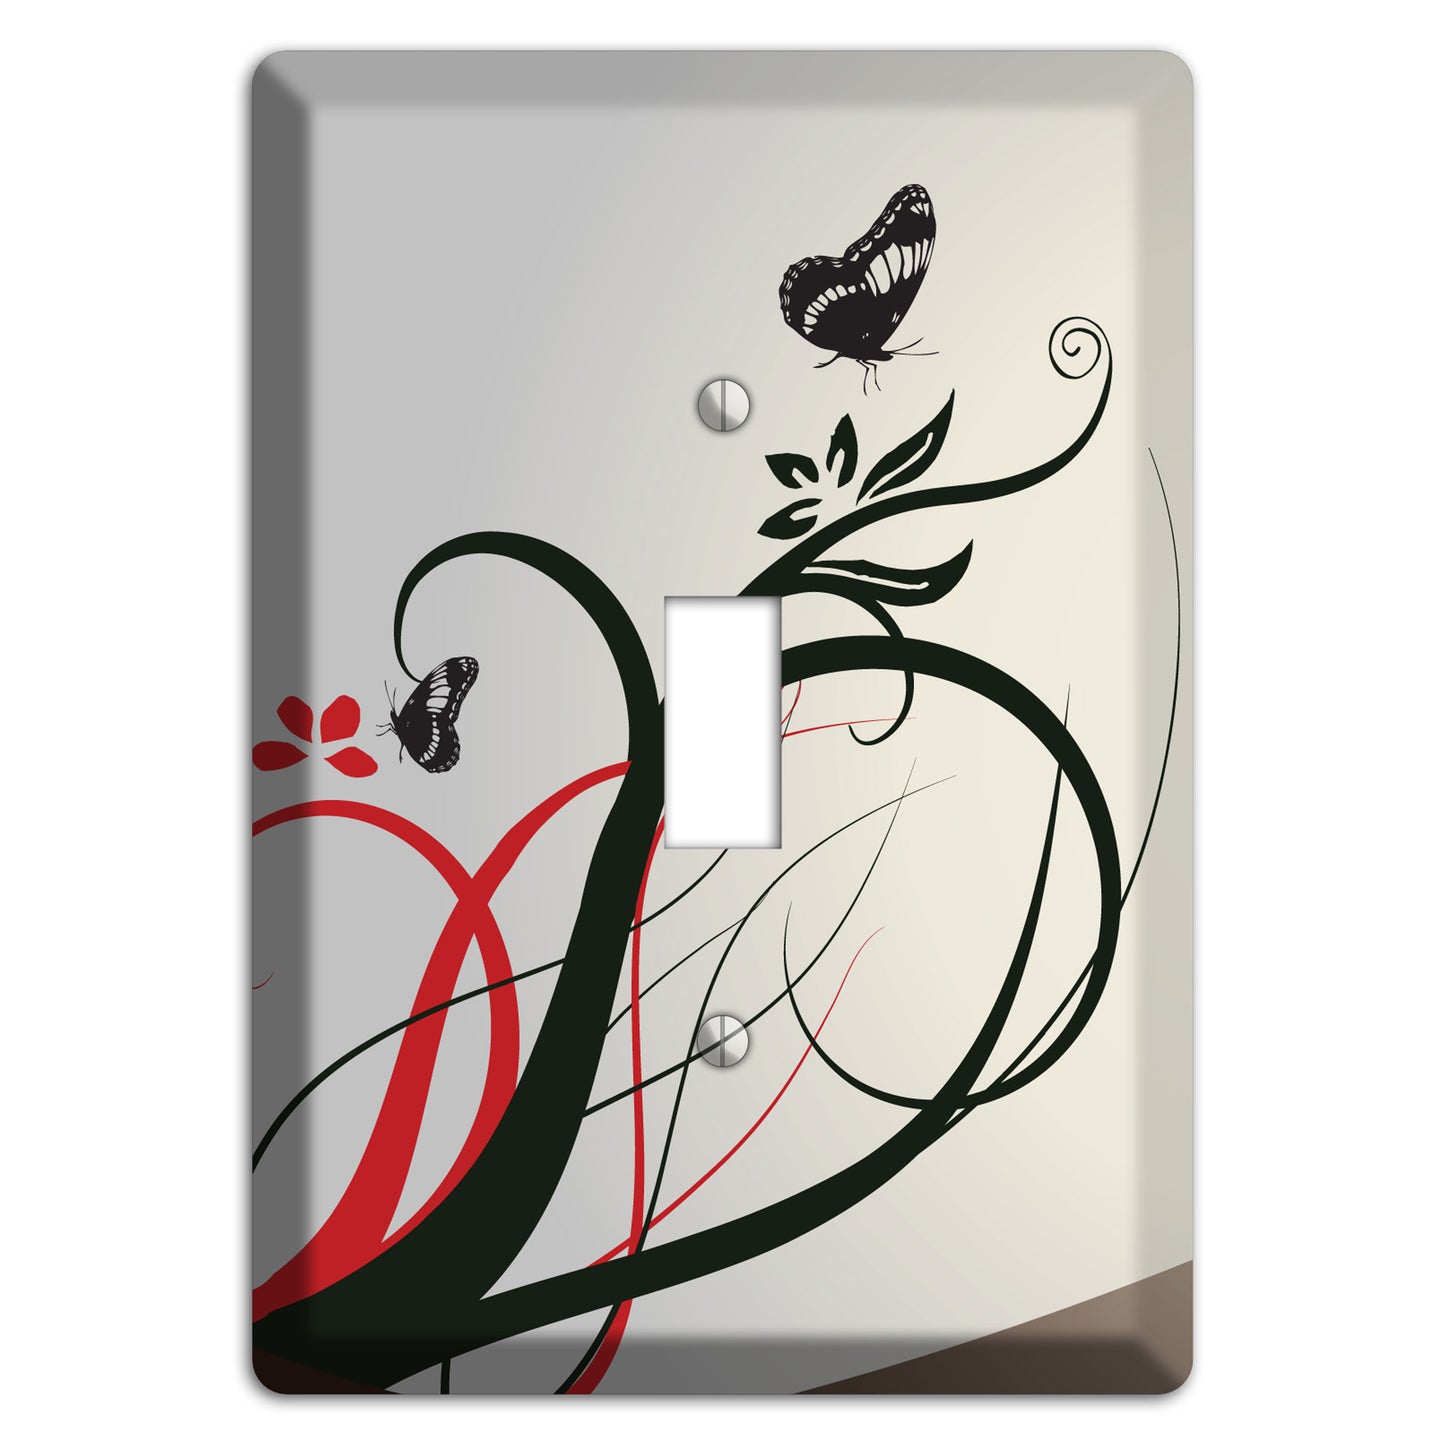 Grey and Red Floral Sprig with Butterfly Cover Plates